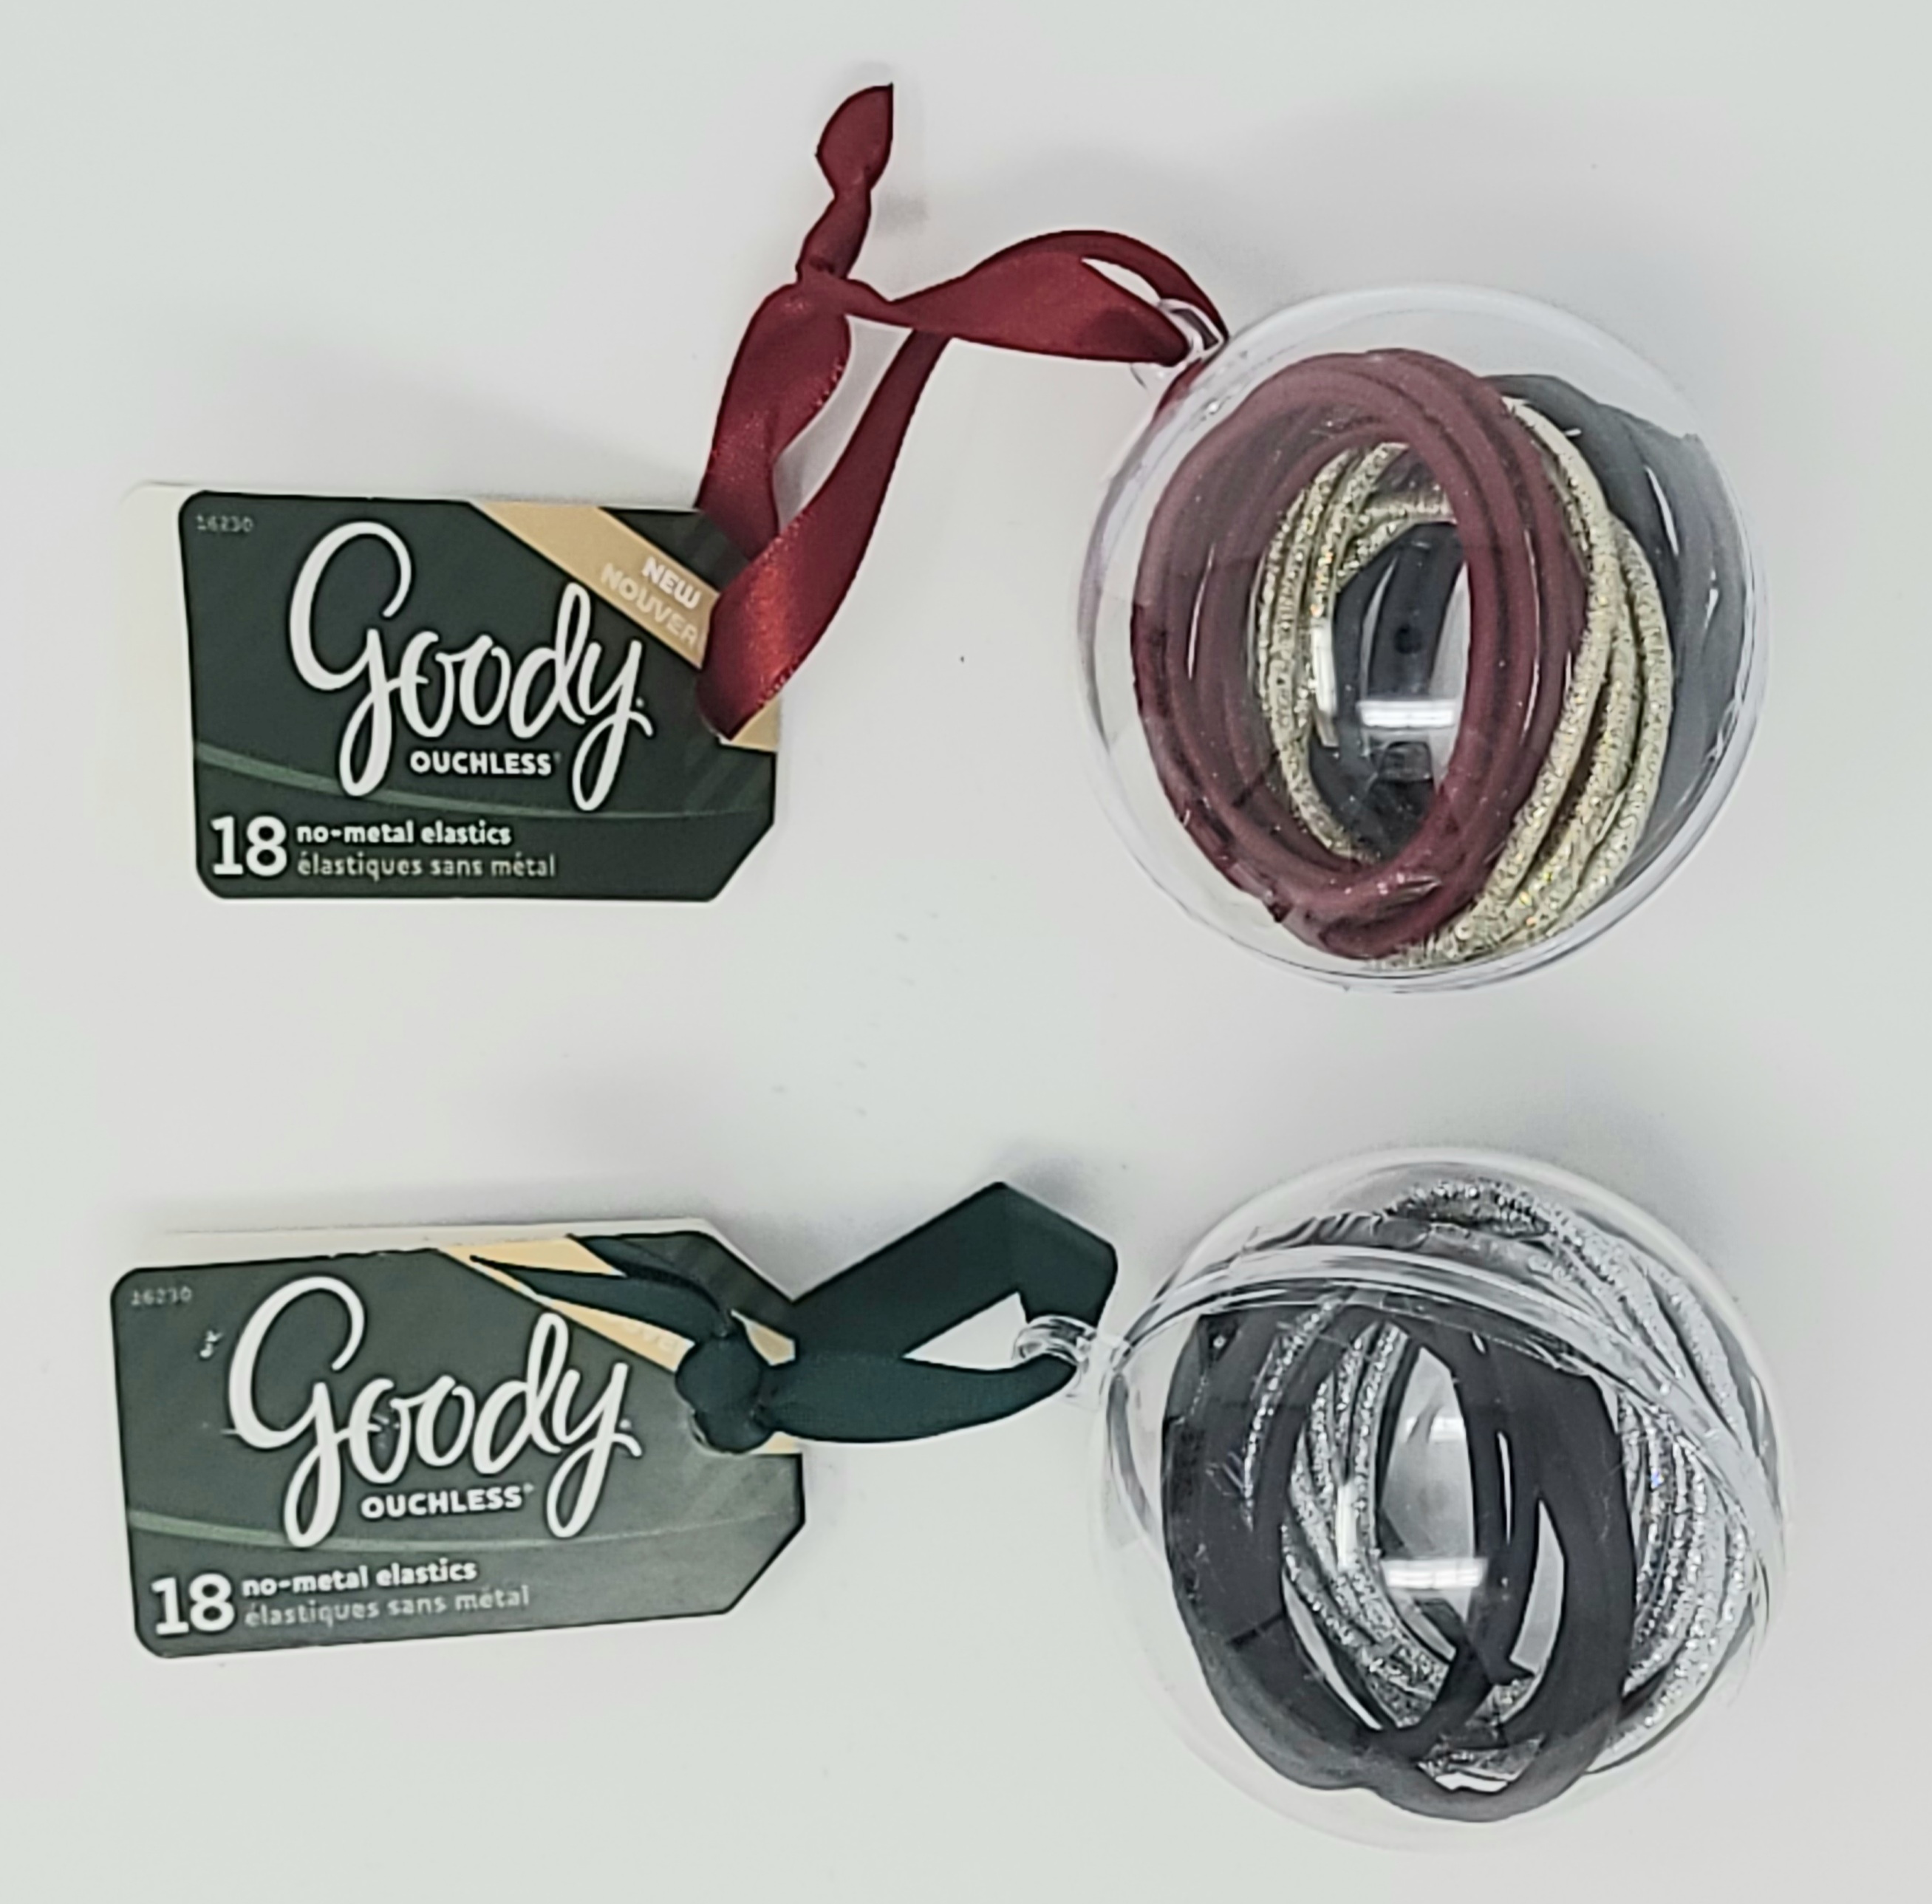 Goody Holiday Christmas Ouchless Elastics Frosted In Ornament Container 18CT - Click Image to Close